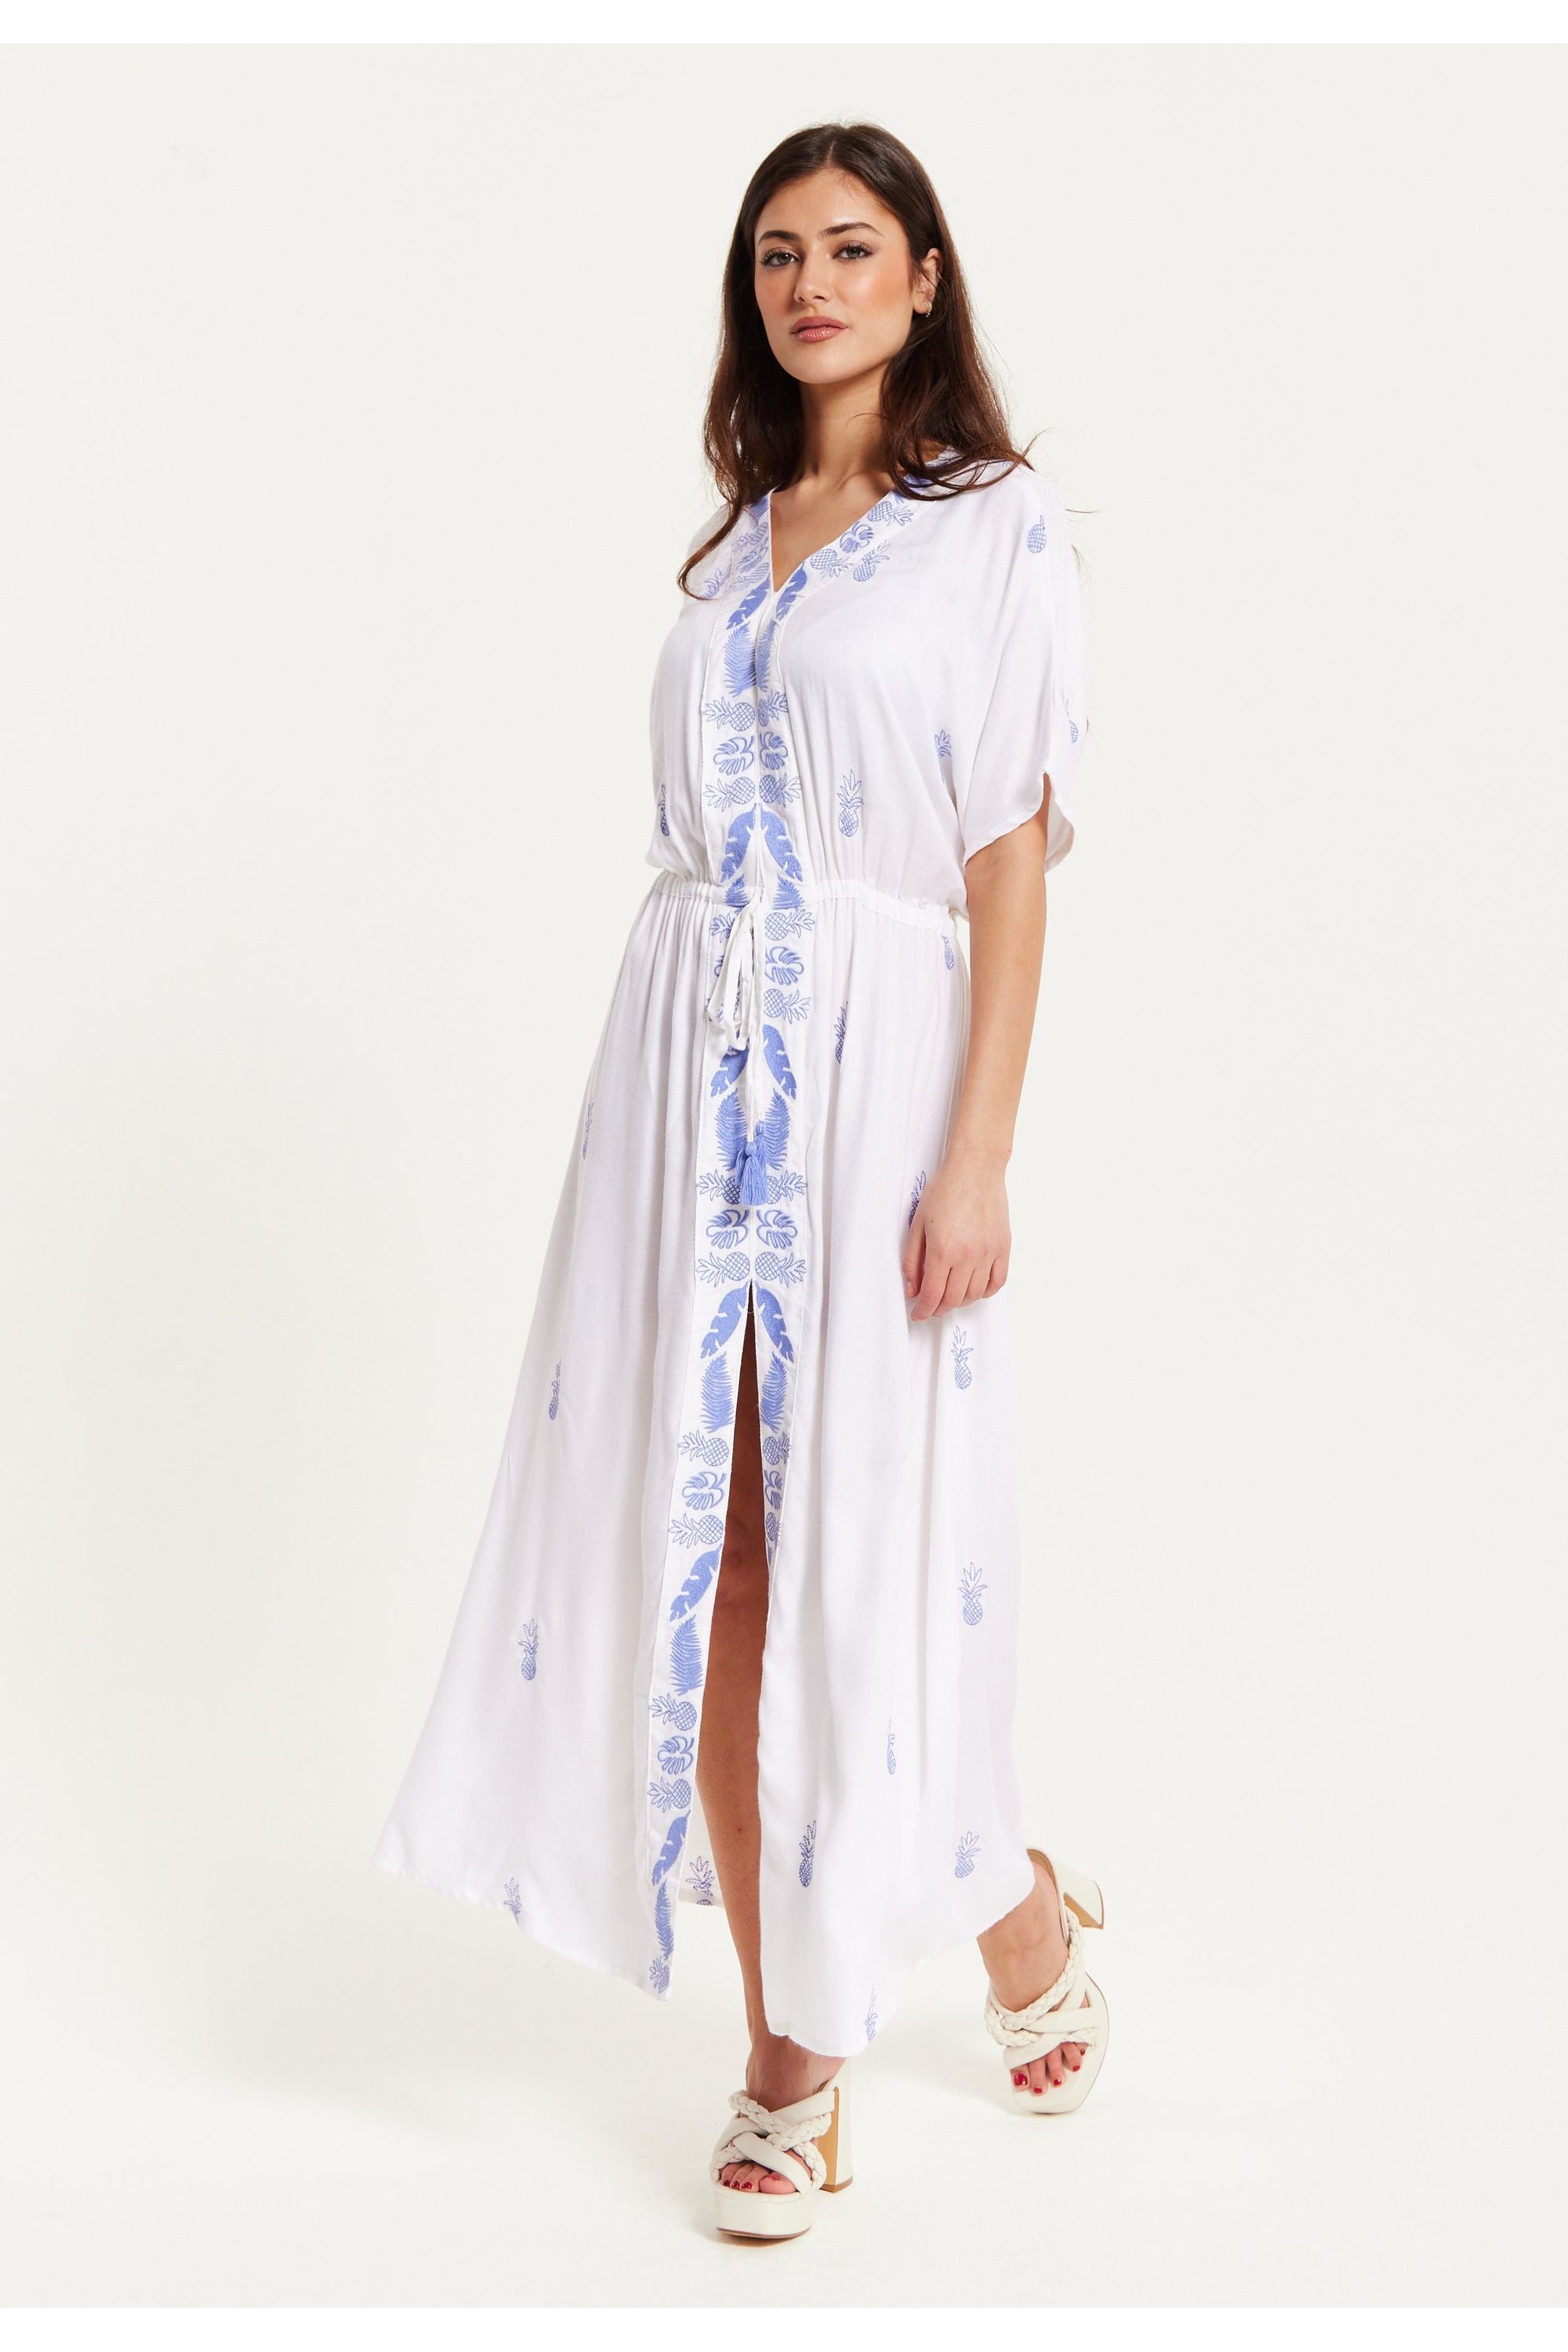 White Maxi Beach Dress With Blue Pineapple Embroidery A9-SNK21W001B